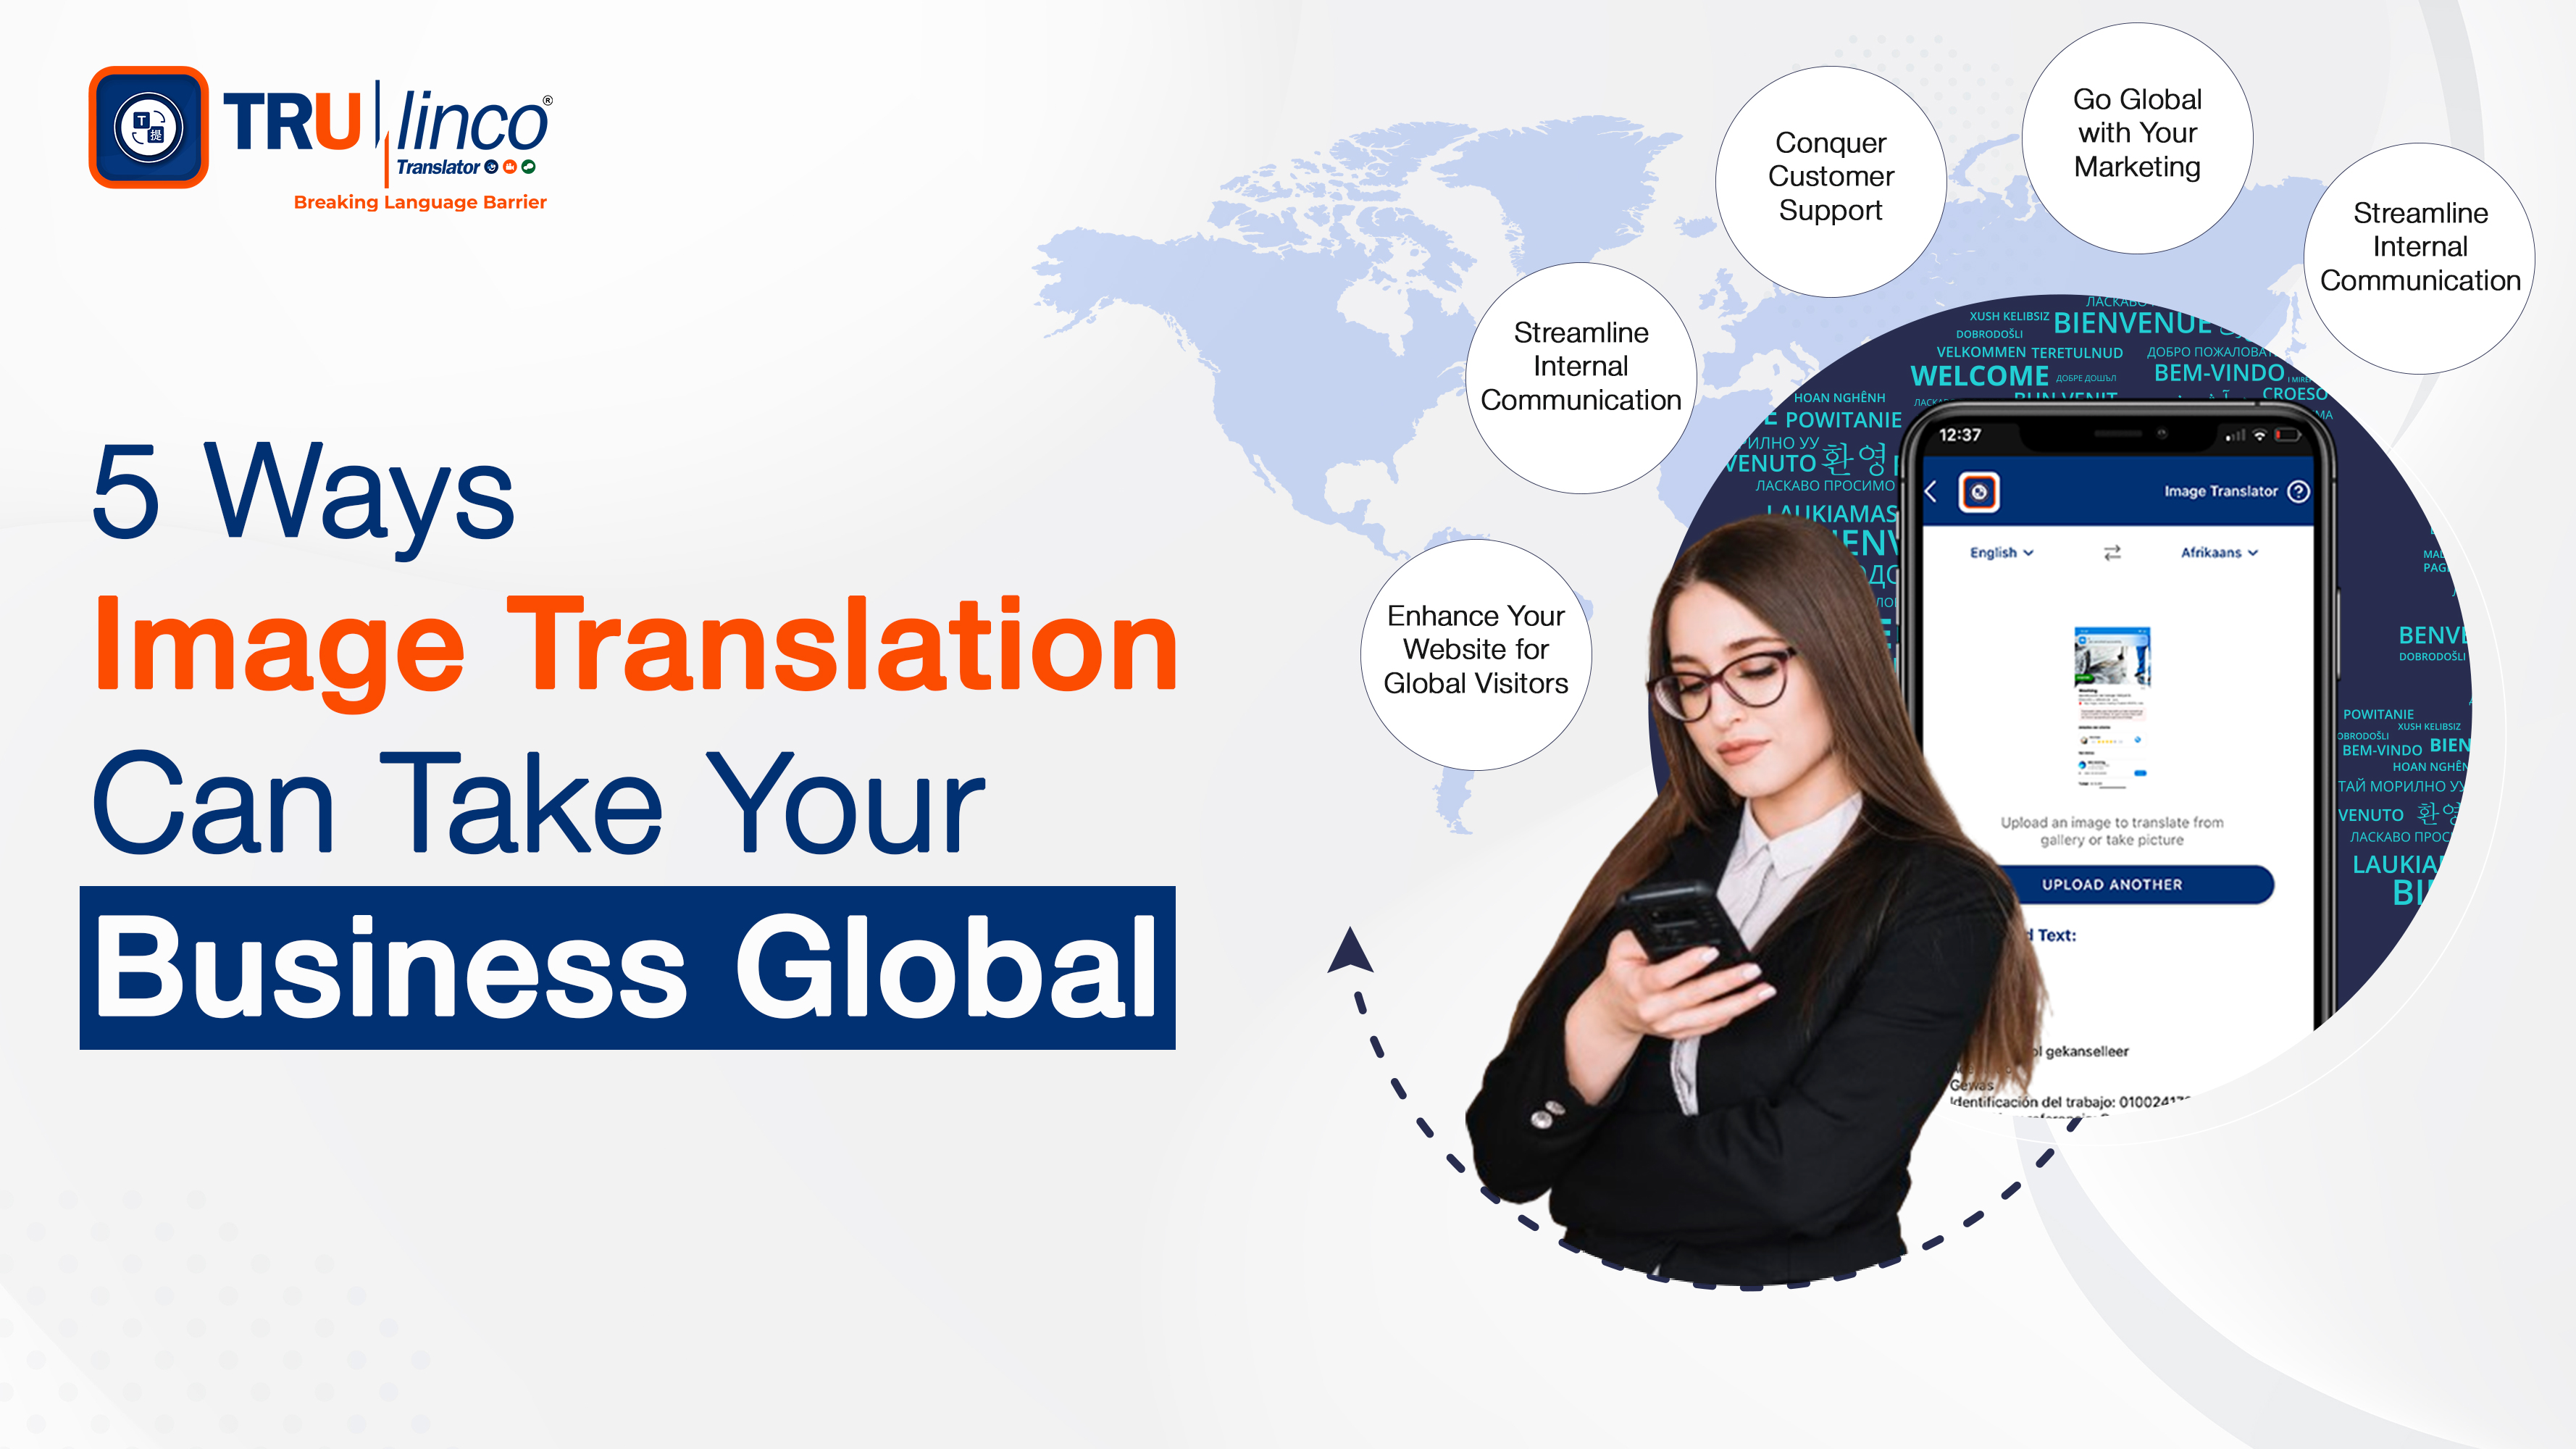 5 Ways Image Translation Can Take Your Business Global